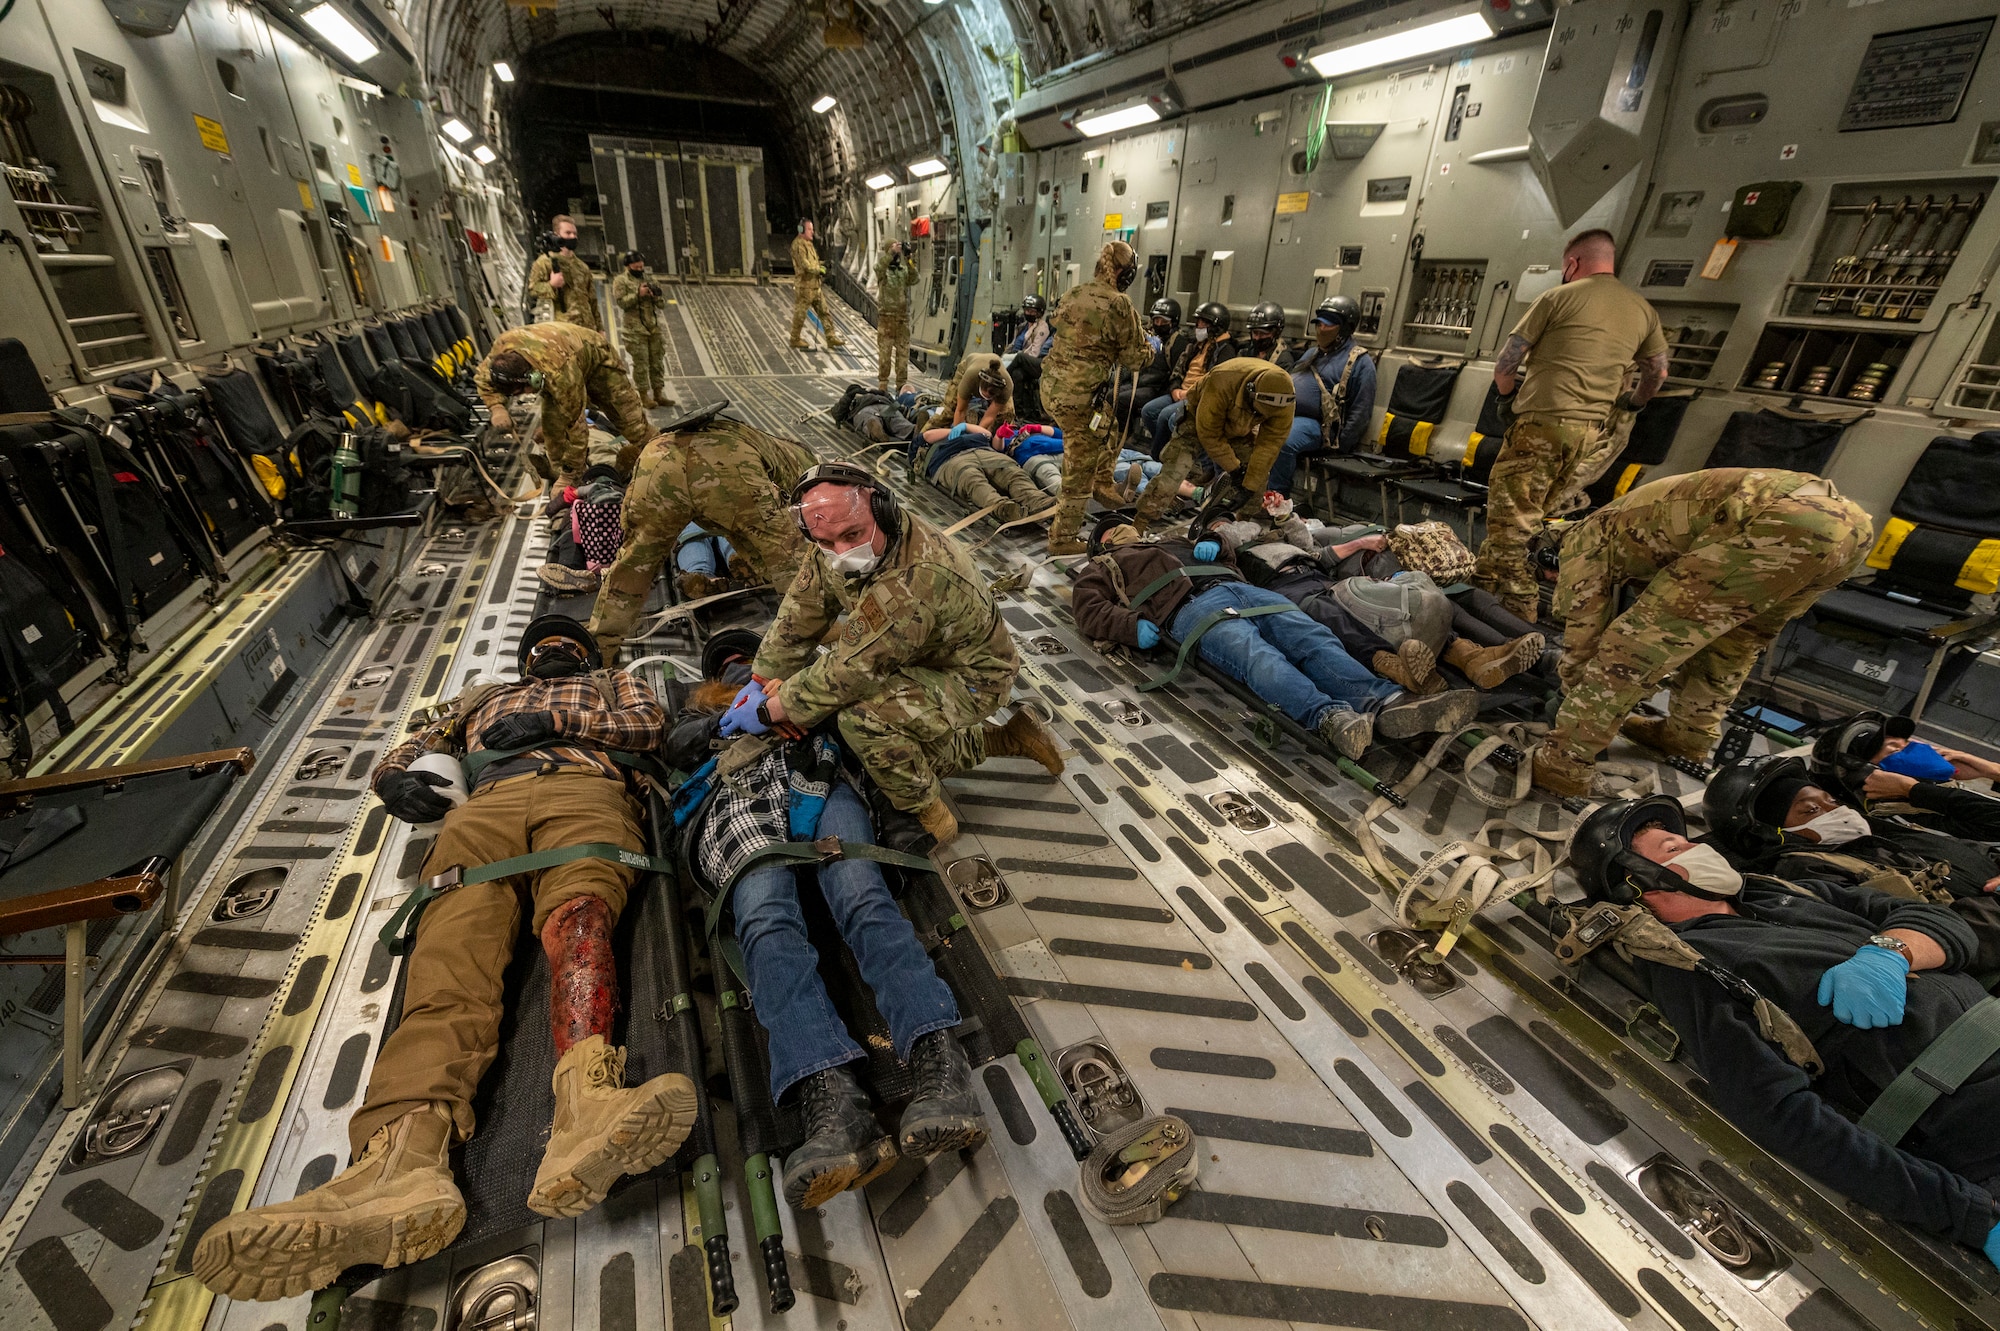 U.S. Air Force aeromedical evacuation specialists secure patients on the floor of a 167th Airlift Wing C-17 Globemaster III aircraft during exercise Green Flag Little Rock 22-03 at Ft. Polk, Louisiana, Jan. 13, 2022. GFLR 22-03 focused on three joint-accredited items: combat airlift; survival, evasion, resistance and escape; and aeromedical evacuation.